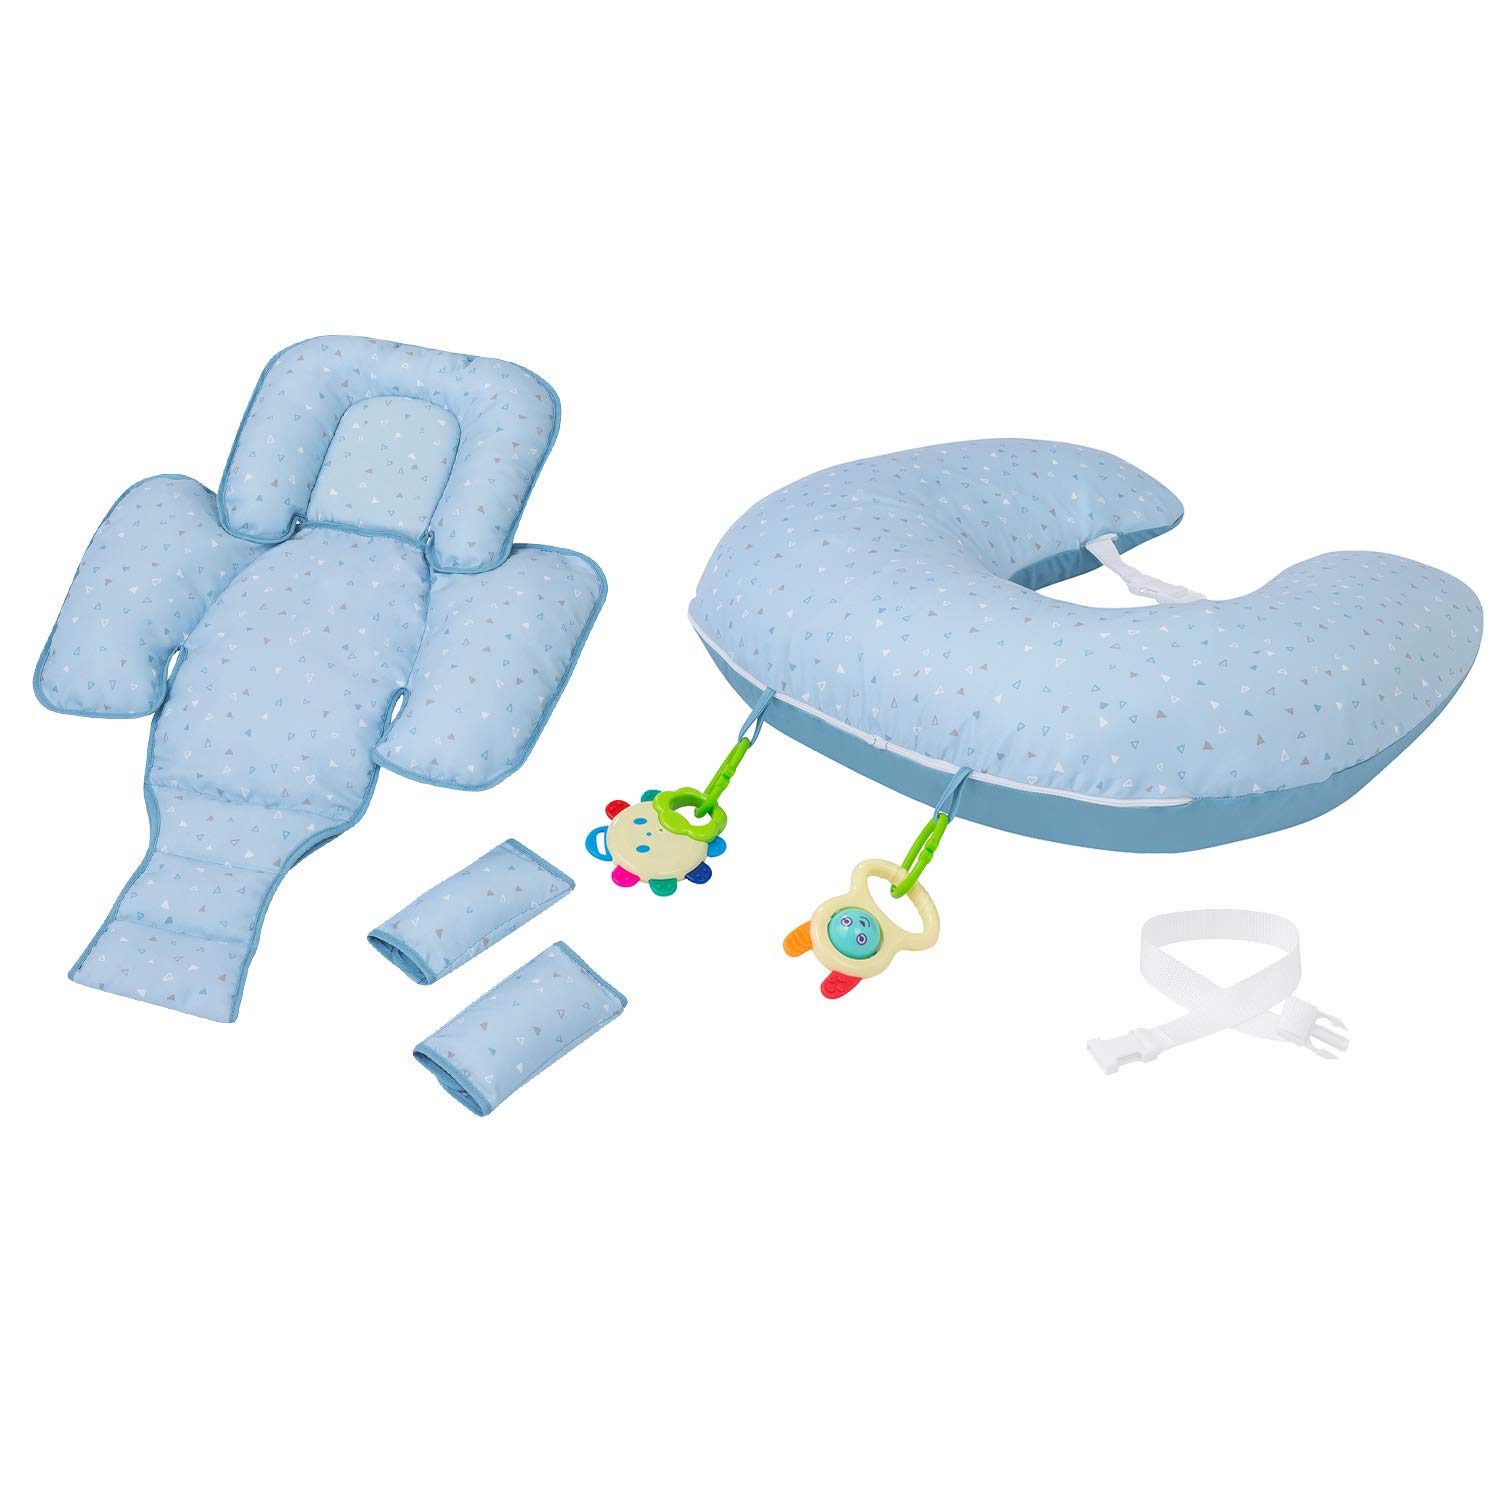 Clevamama 3012 Nursing Pillow and Nest Blue